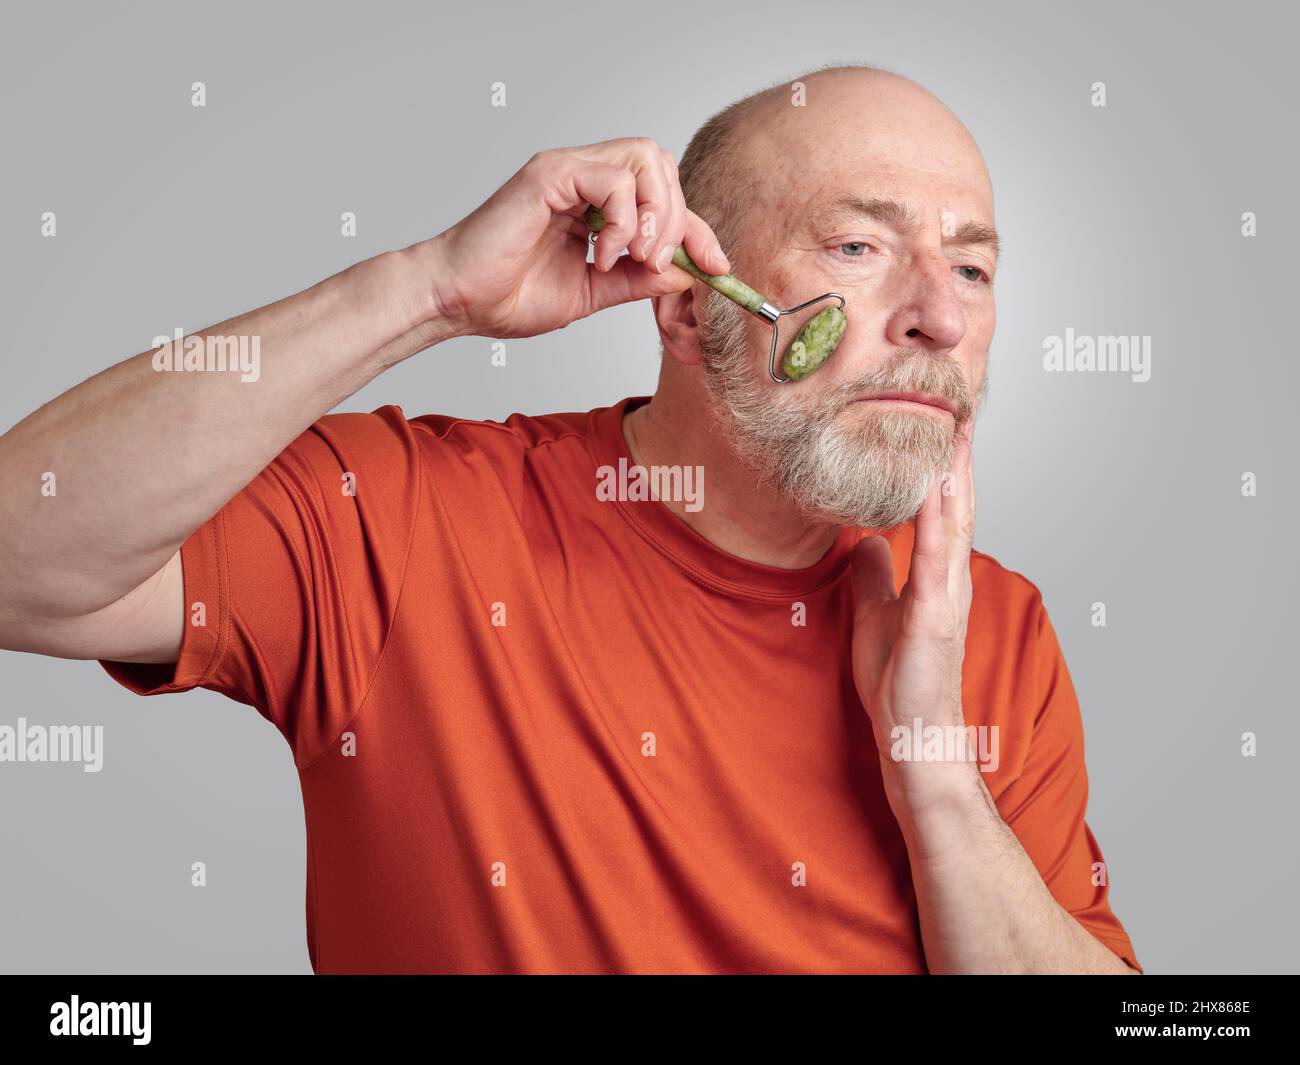 senior man is using a jade stone roller for a face massage, skin care routine concept Stock Photo